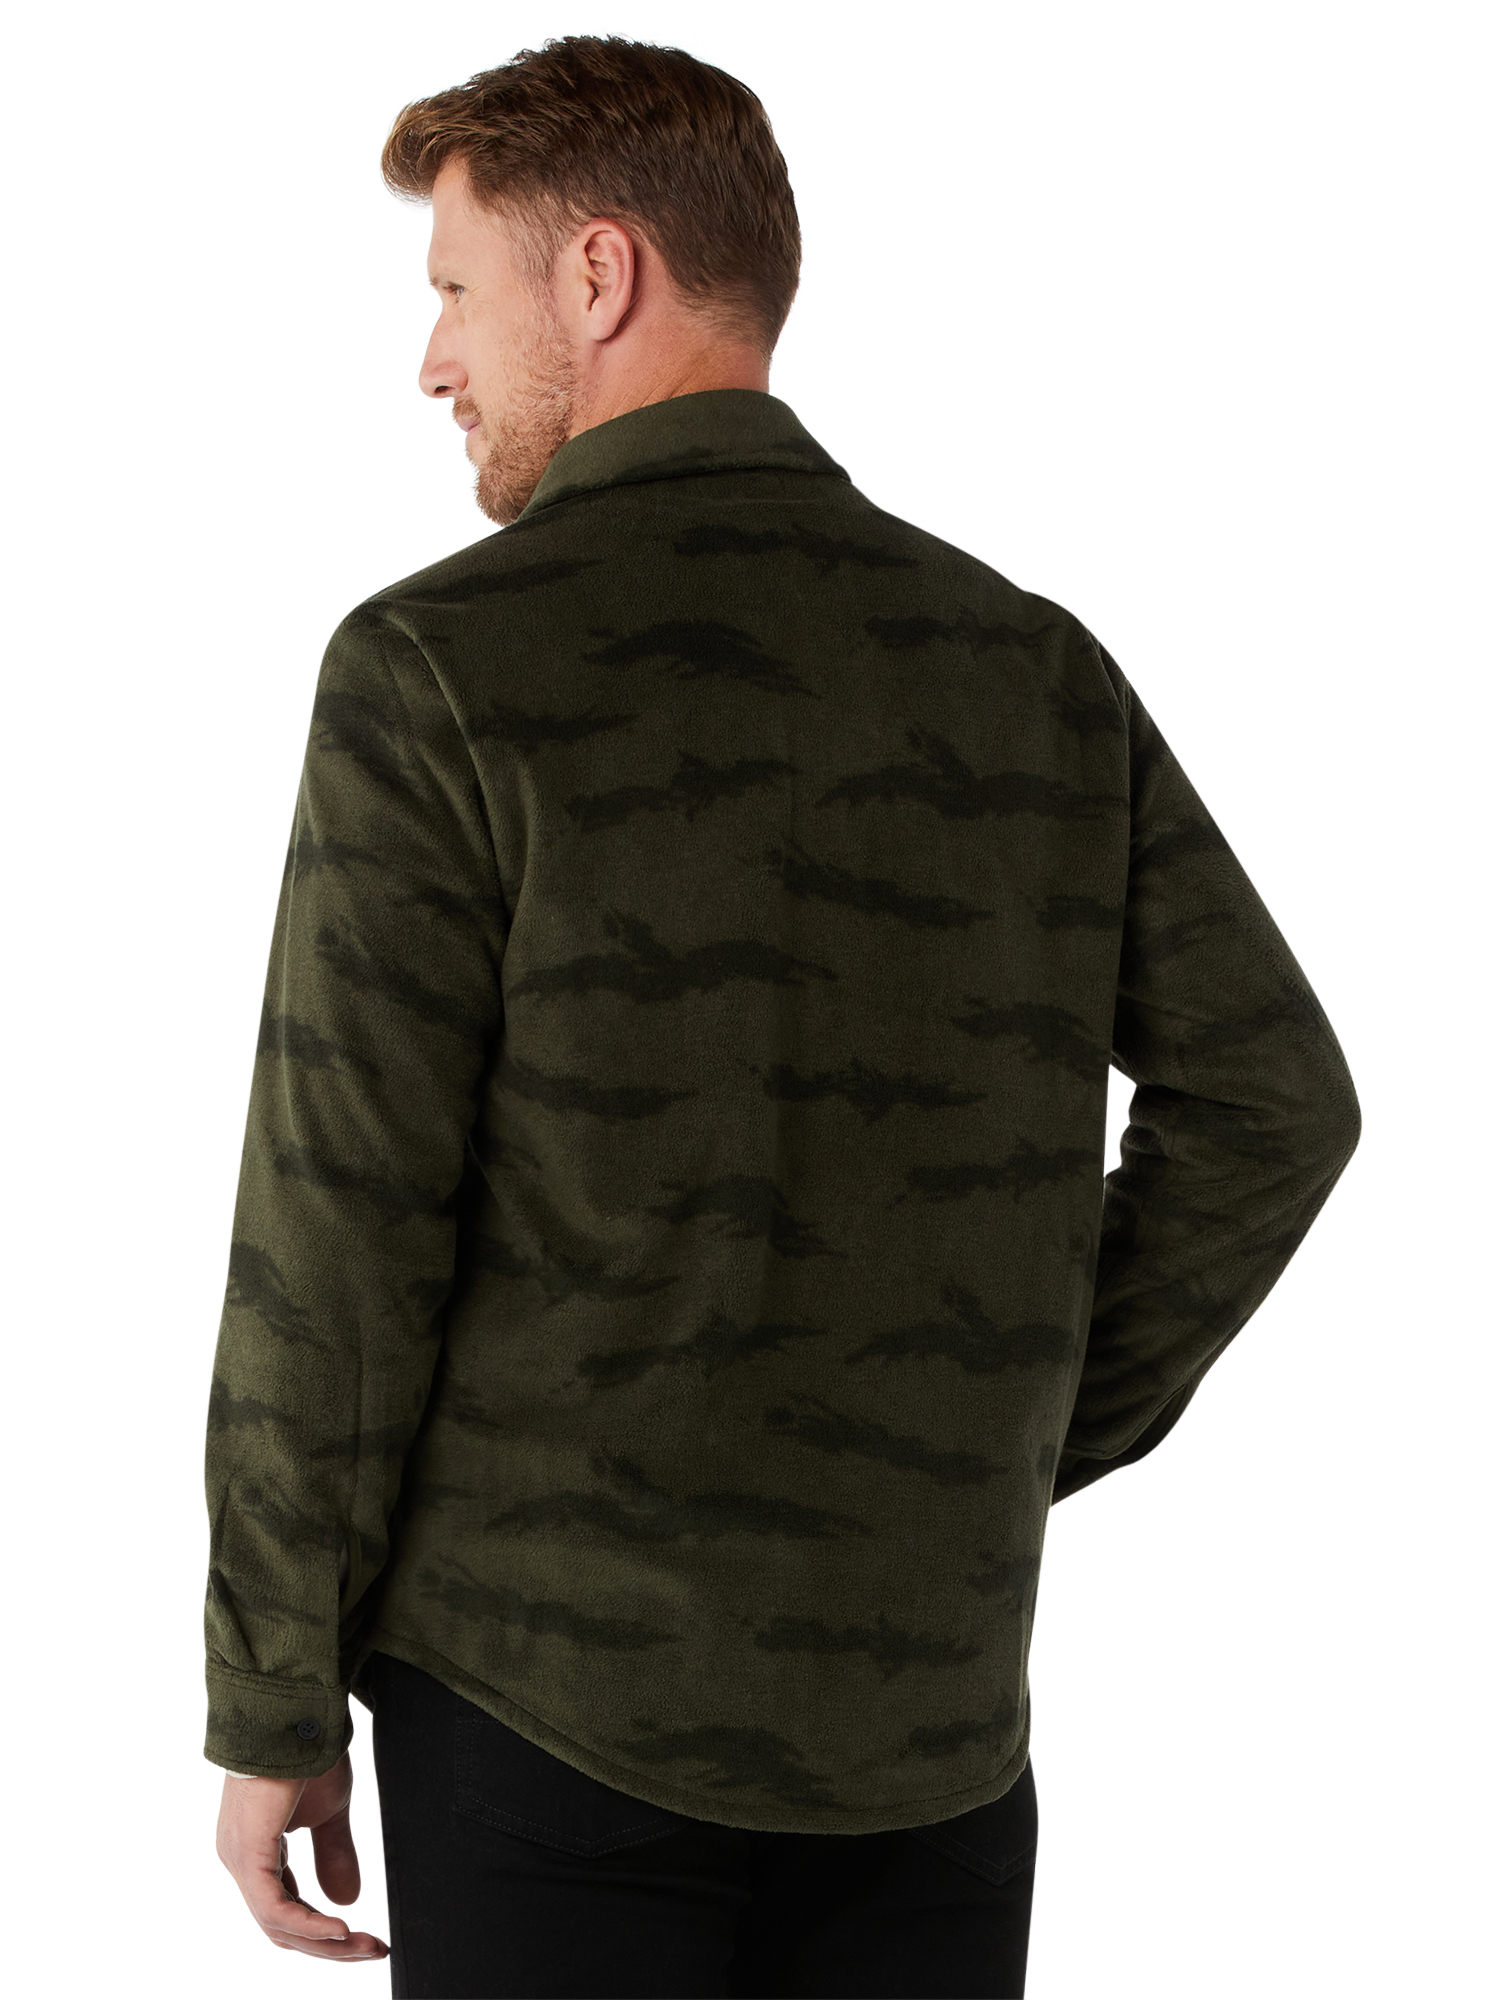 Free Assembly Men's Fleece Shirt with Two Pockets - image 4 of 6